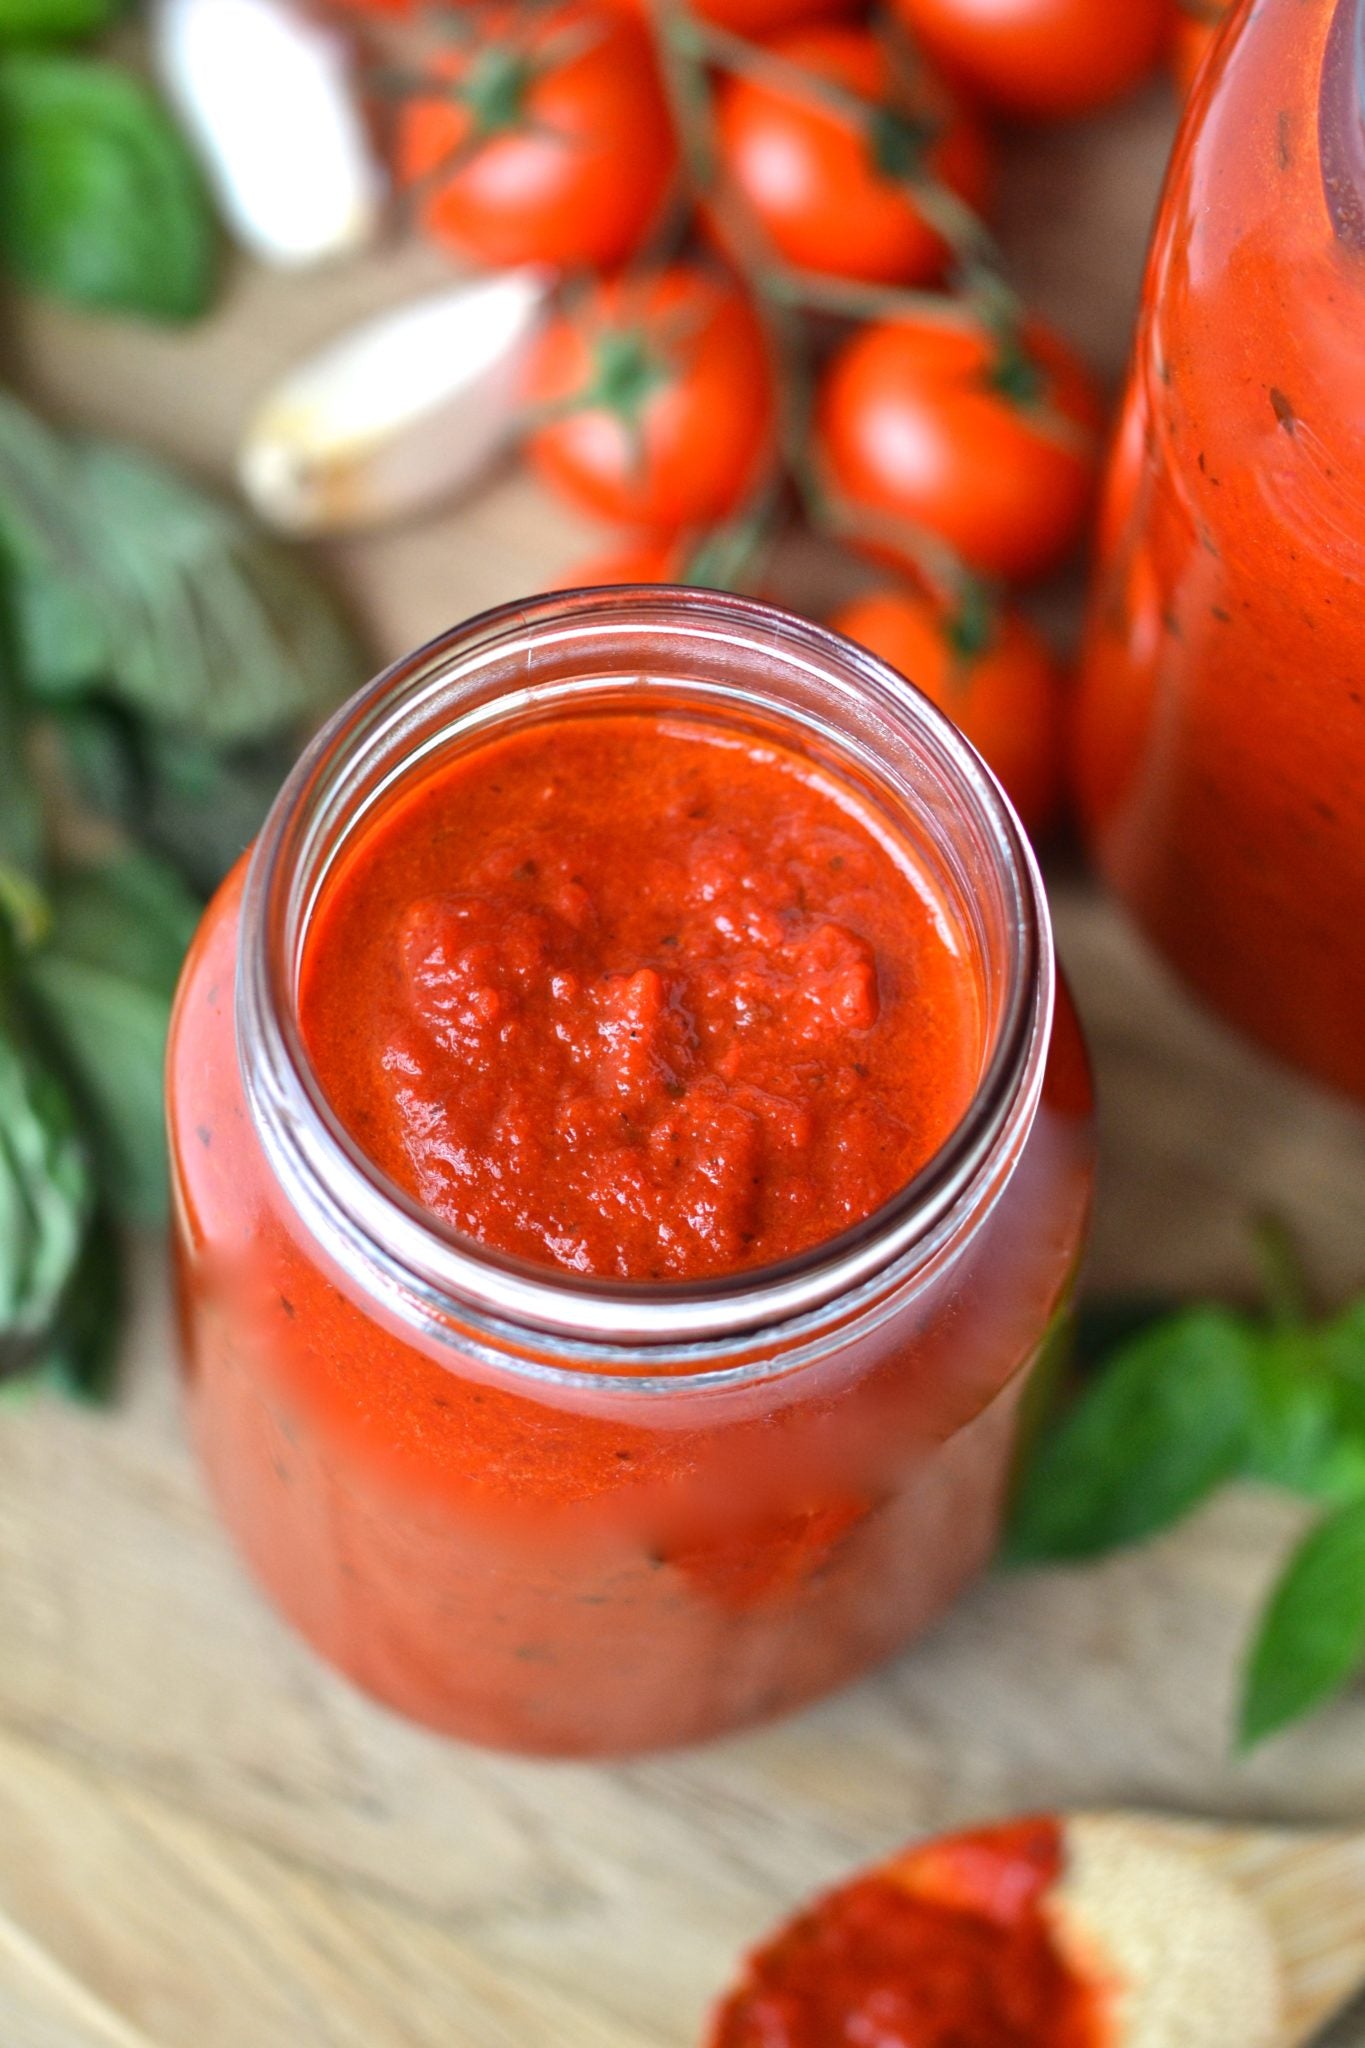 Consiglio's Tomato Sauce Recipe for Canning